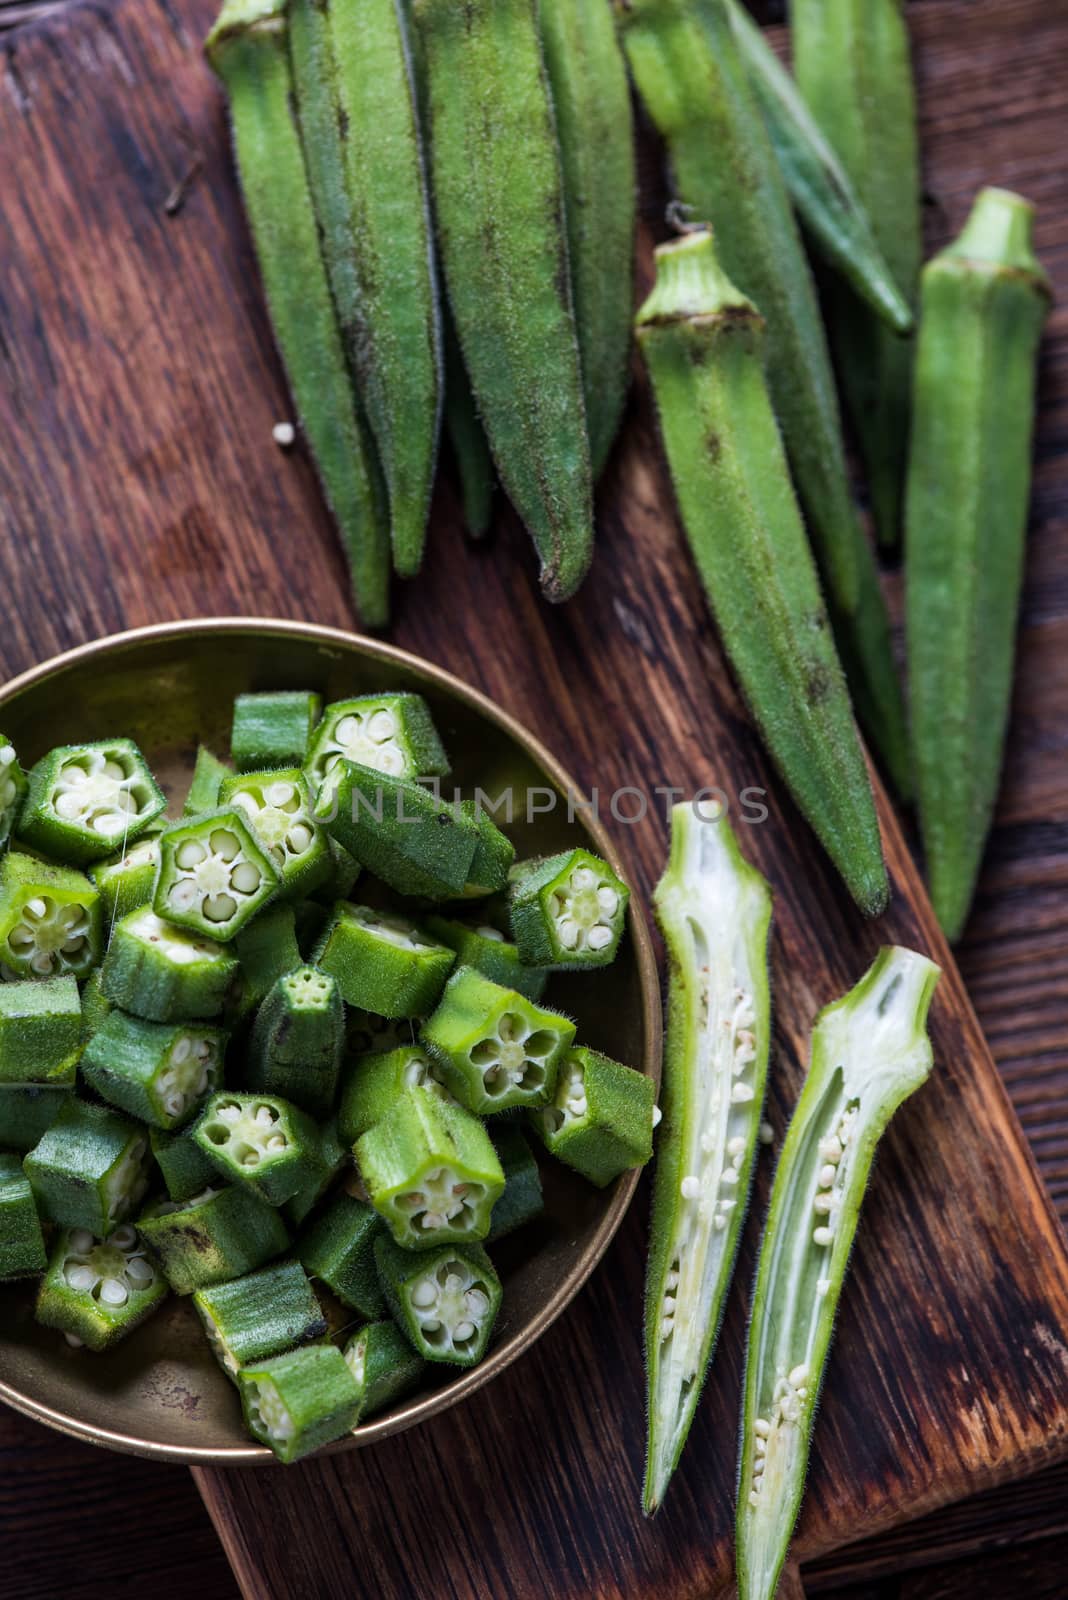 Farm fresh okra on wooden board, whole and sliced